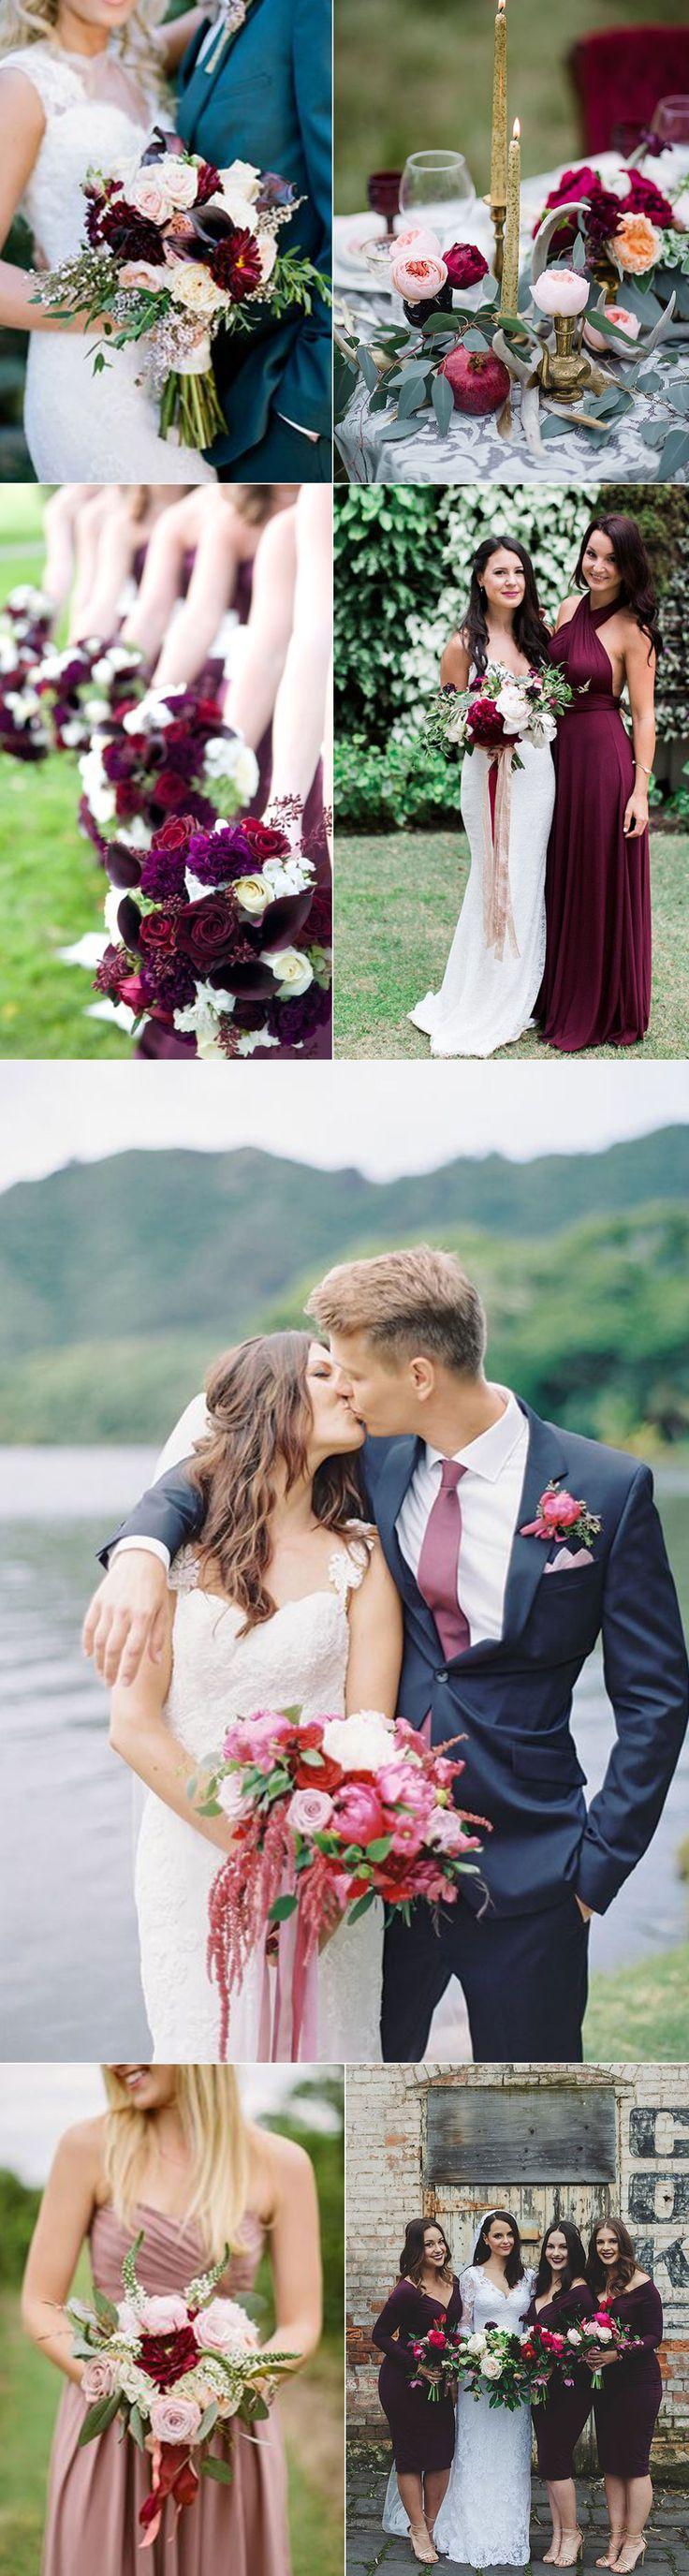 Mariage - Wedding Inspiration For Plums And Pinks   